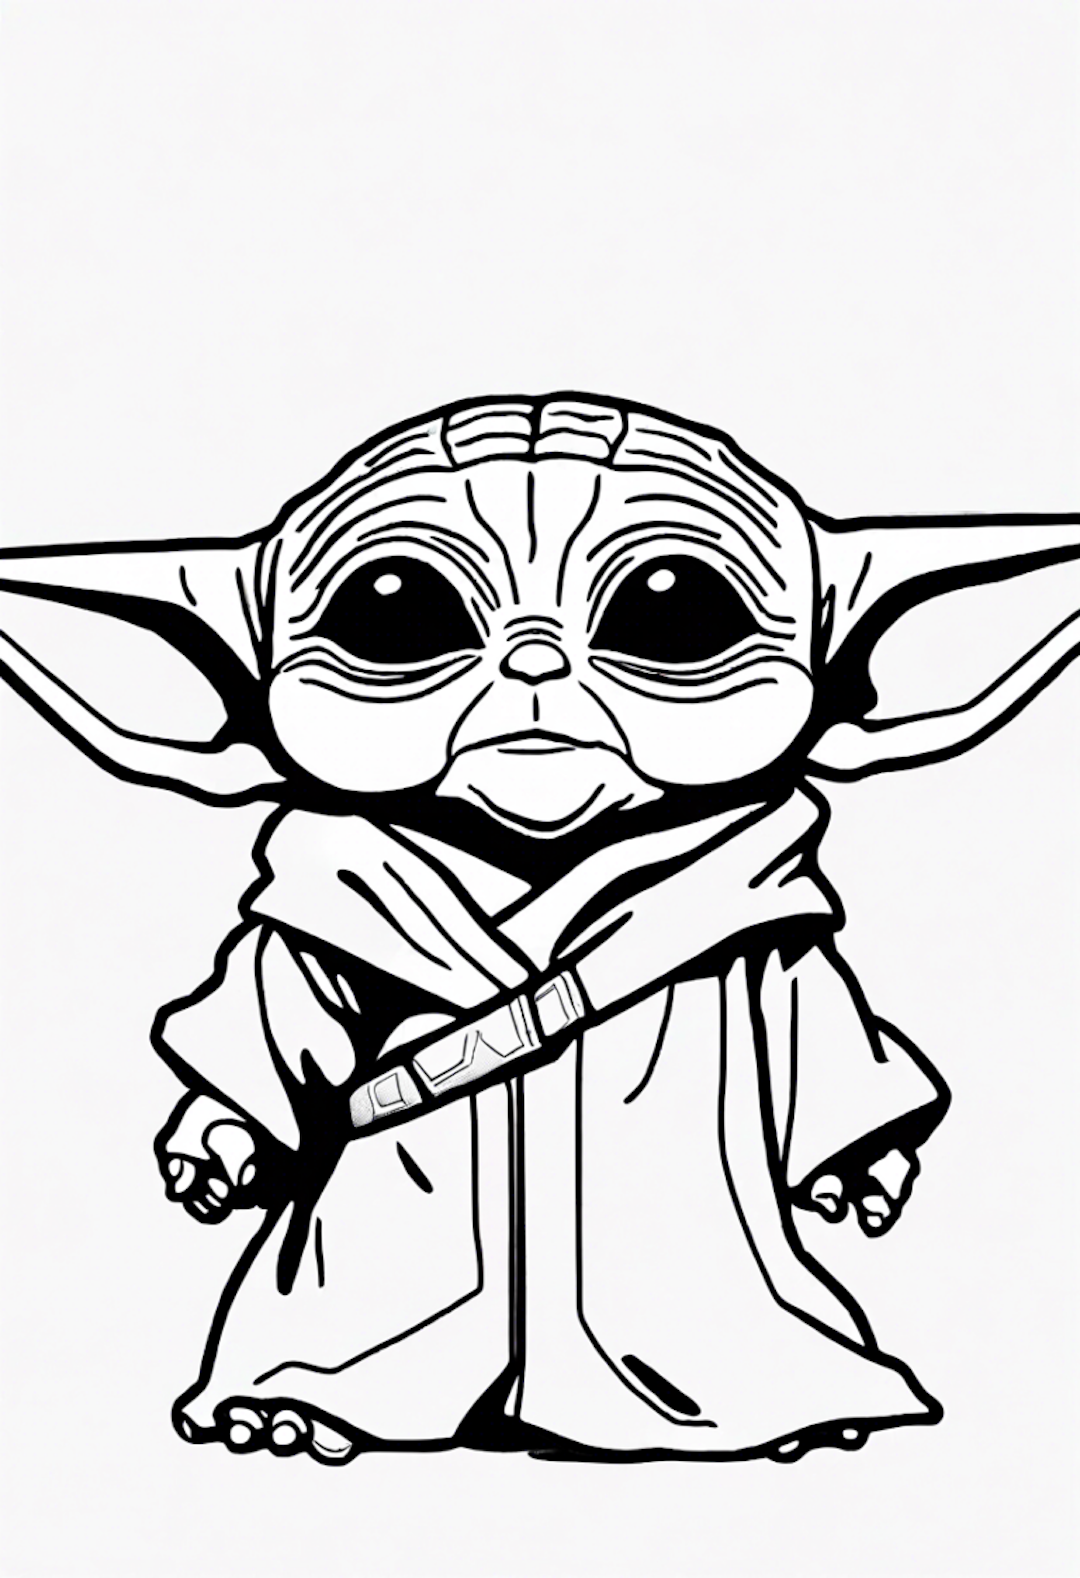 Baby Yoda Coloring Page Adventure coloring pages